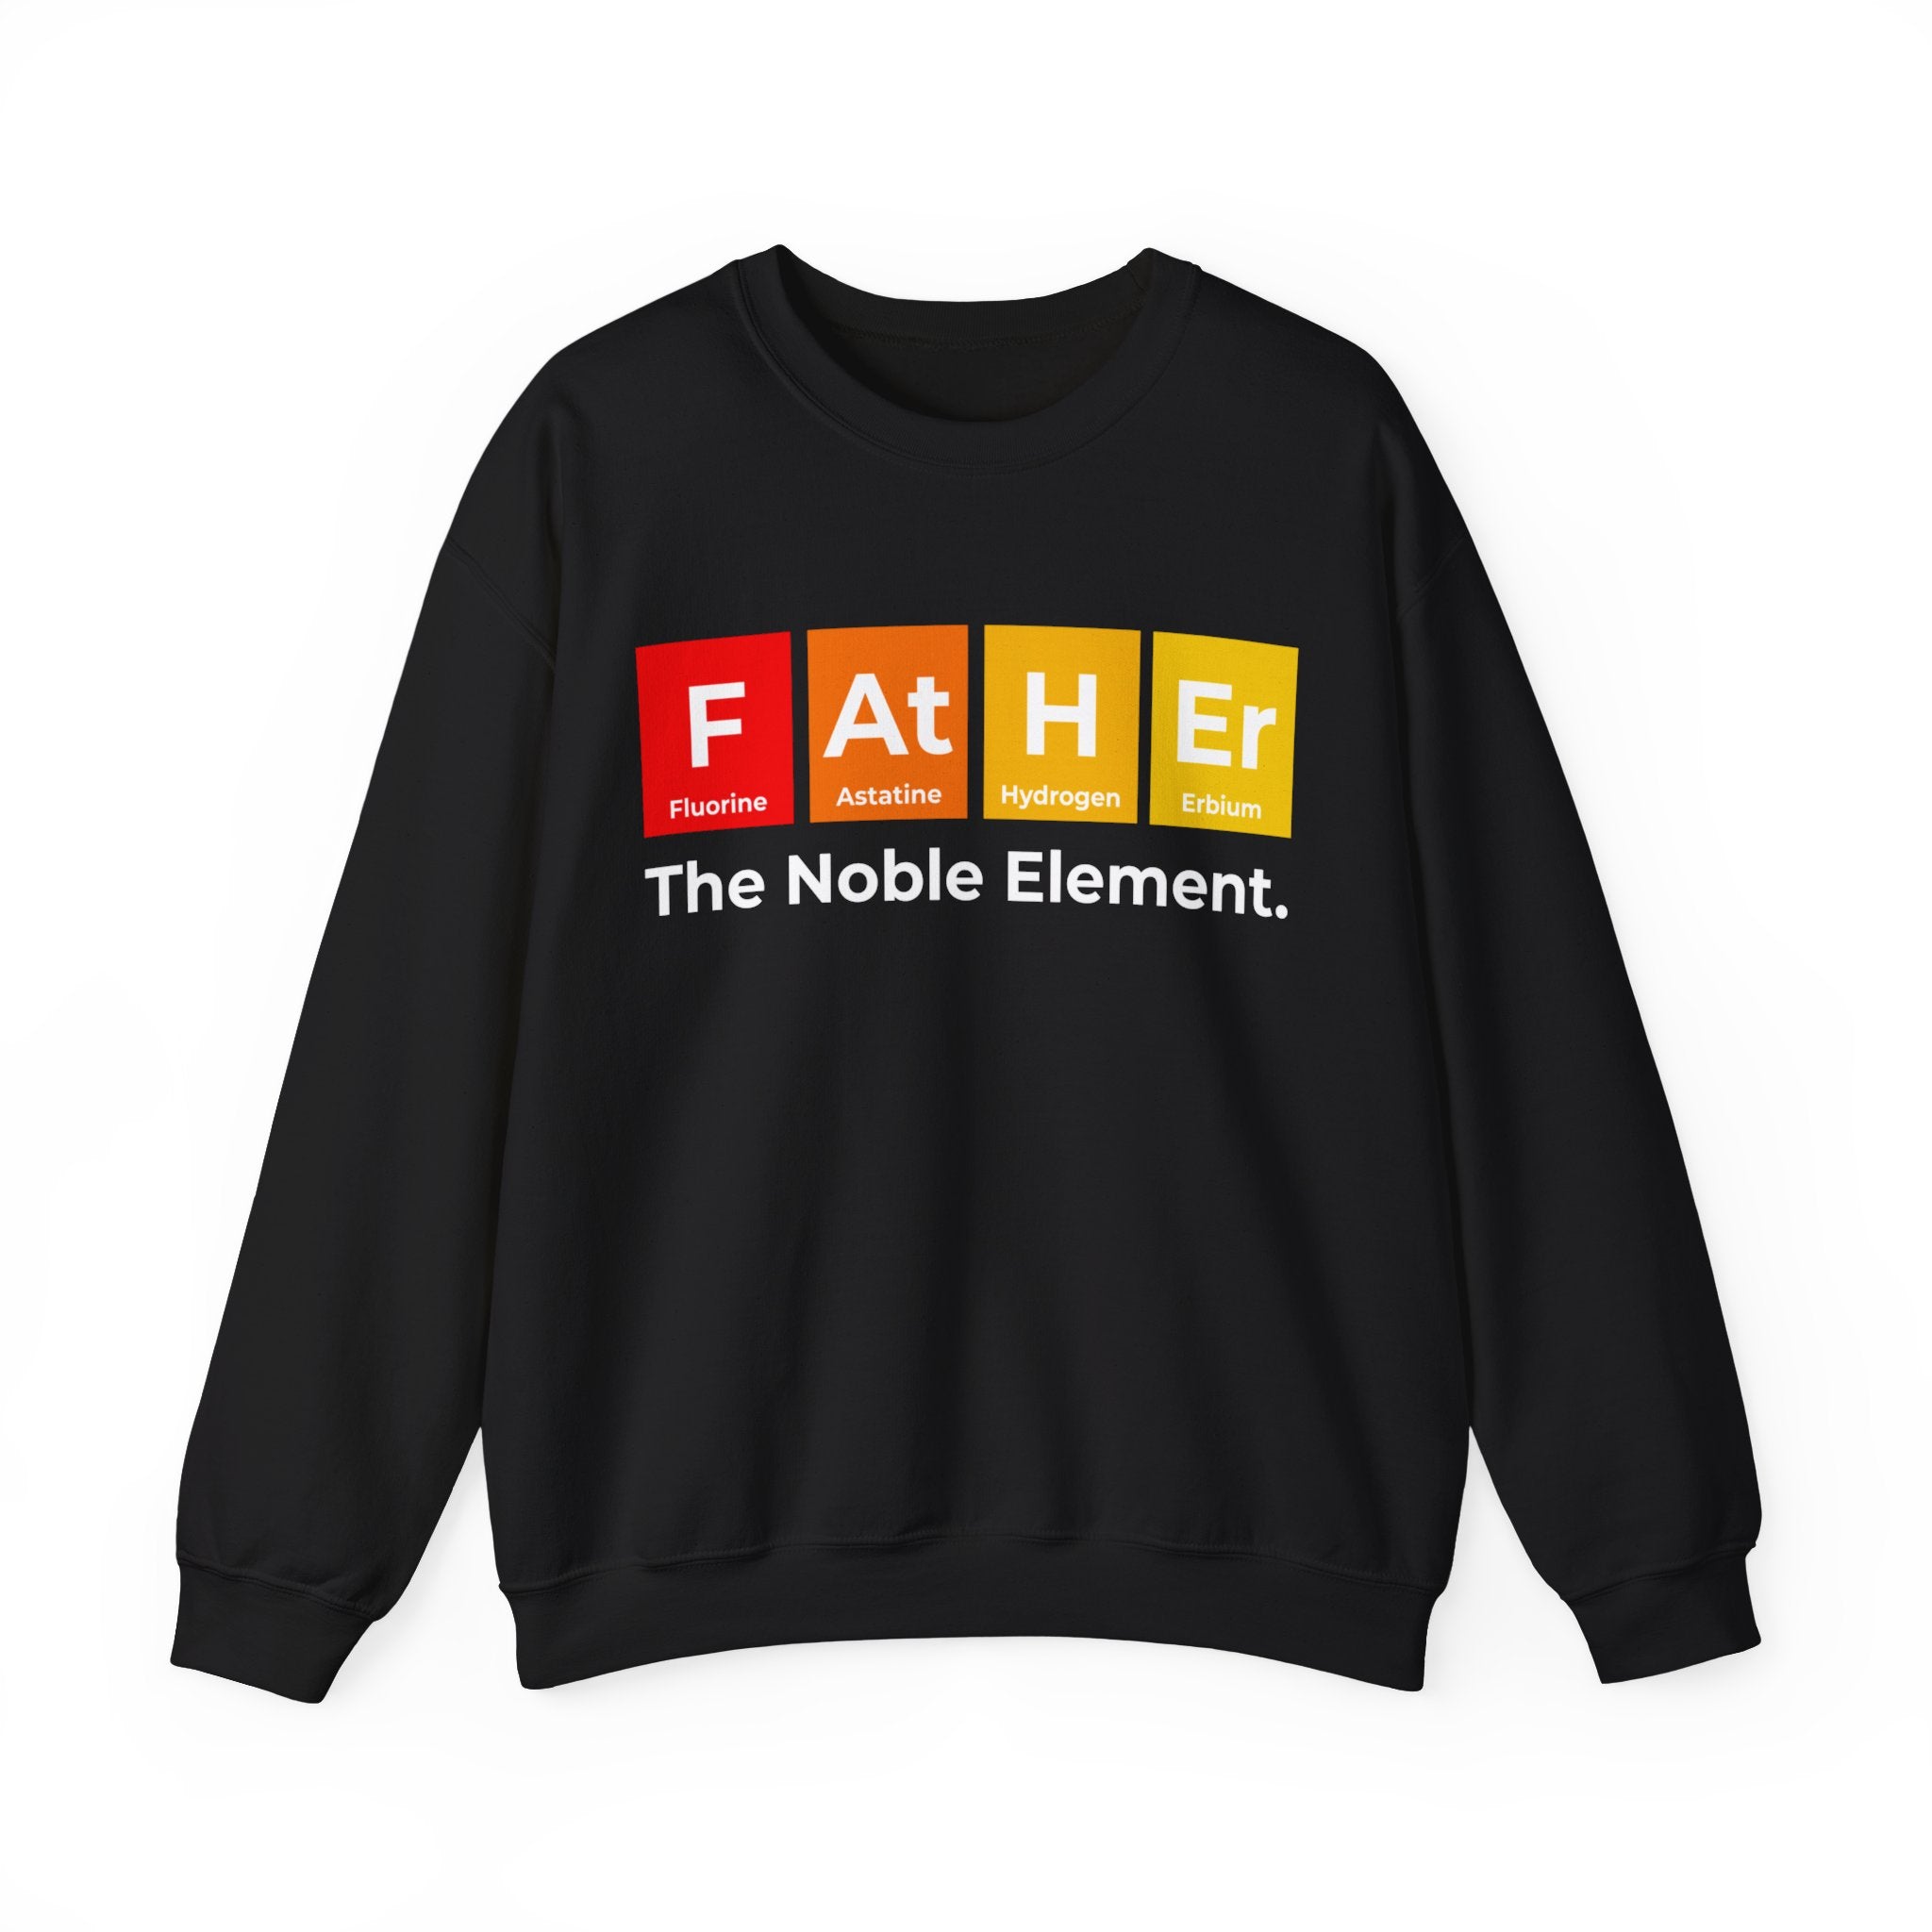 Stay warm and stylish this winter with our cozy black sweatshirt featuring Father Graphic - Sweatshirt. The text "Father" is creatively spelled using colorful periodic table elements (Fluorine, Astatine, Hydrogen, and Erbium), with the subtitle "The Noble Element.